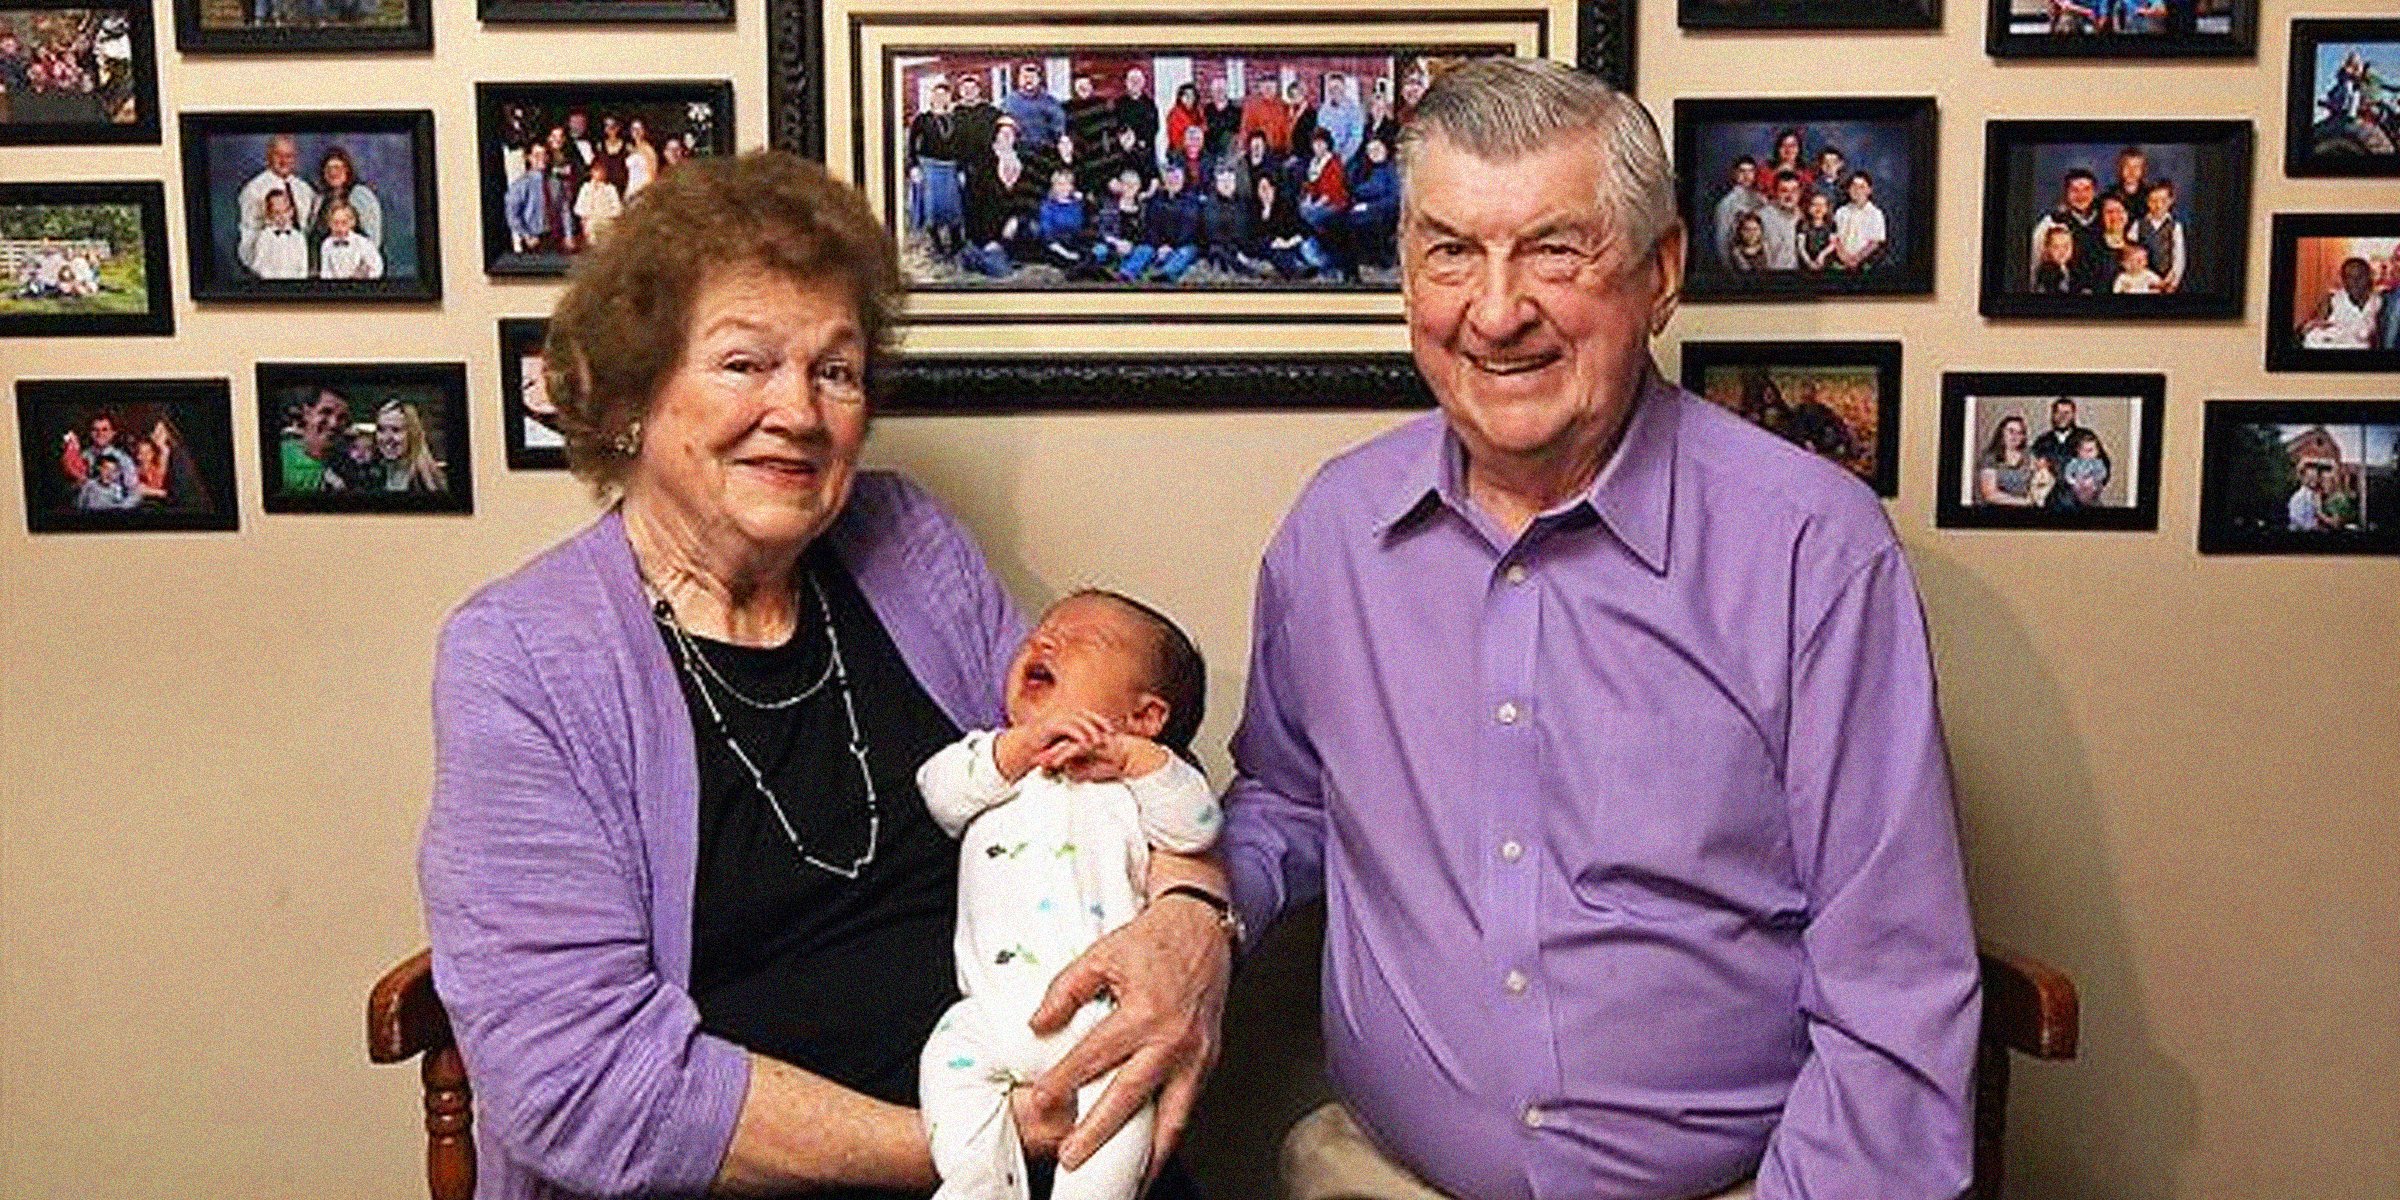 Leo and Ruth Zanger with their 100th grandson Jaxton. | Source: Facebook/TV Anouvelles